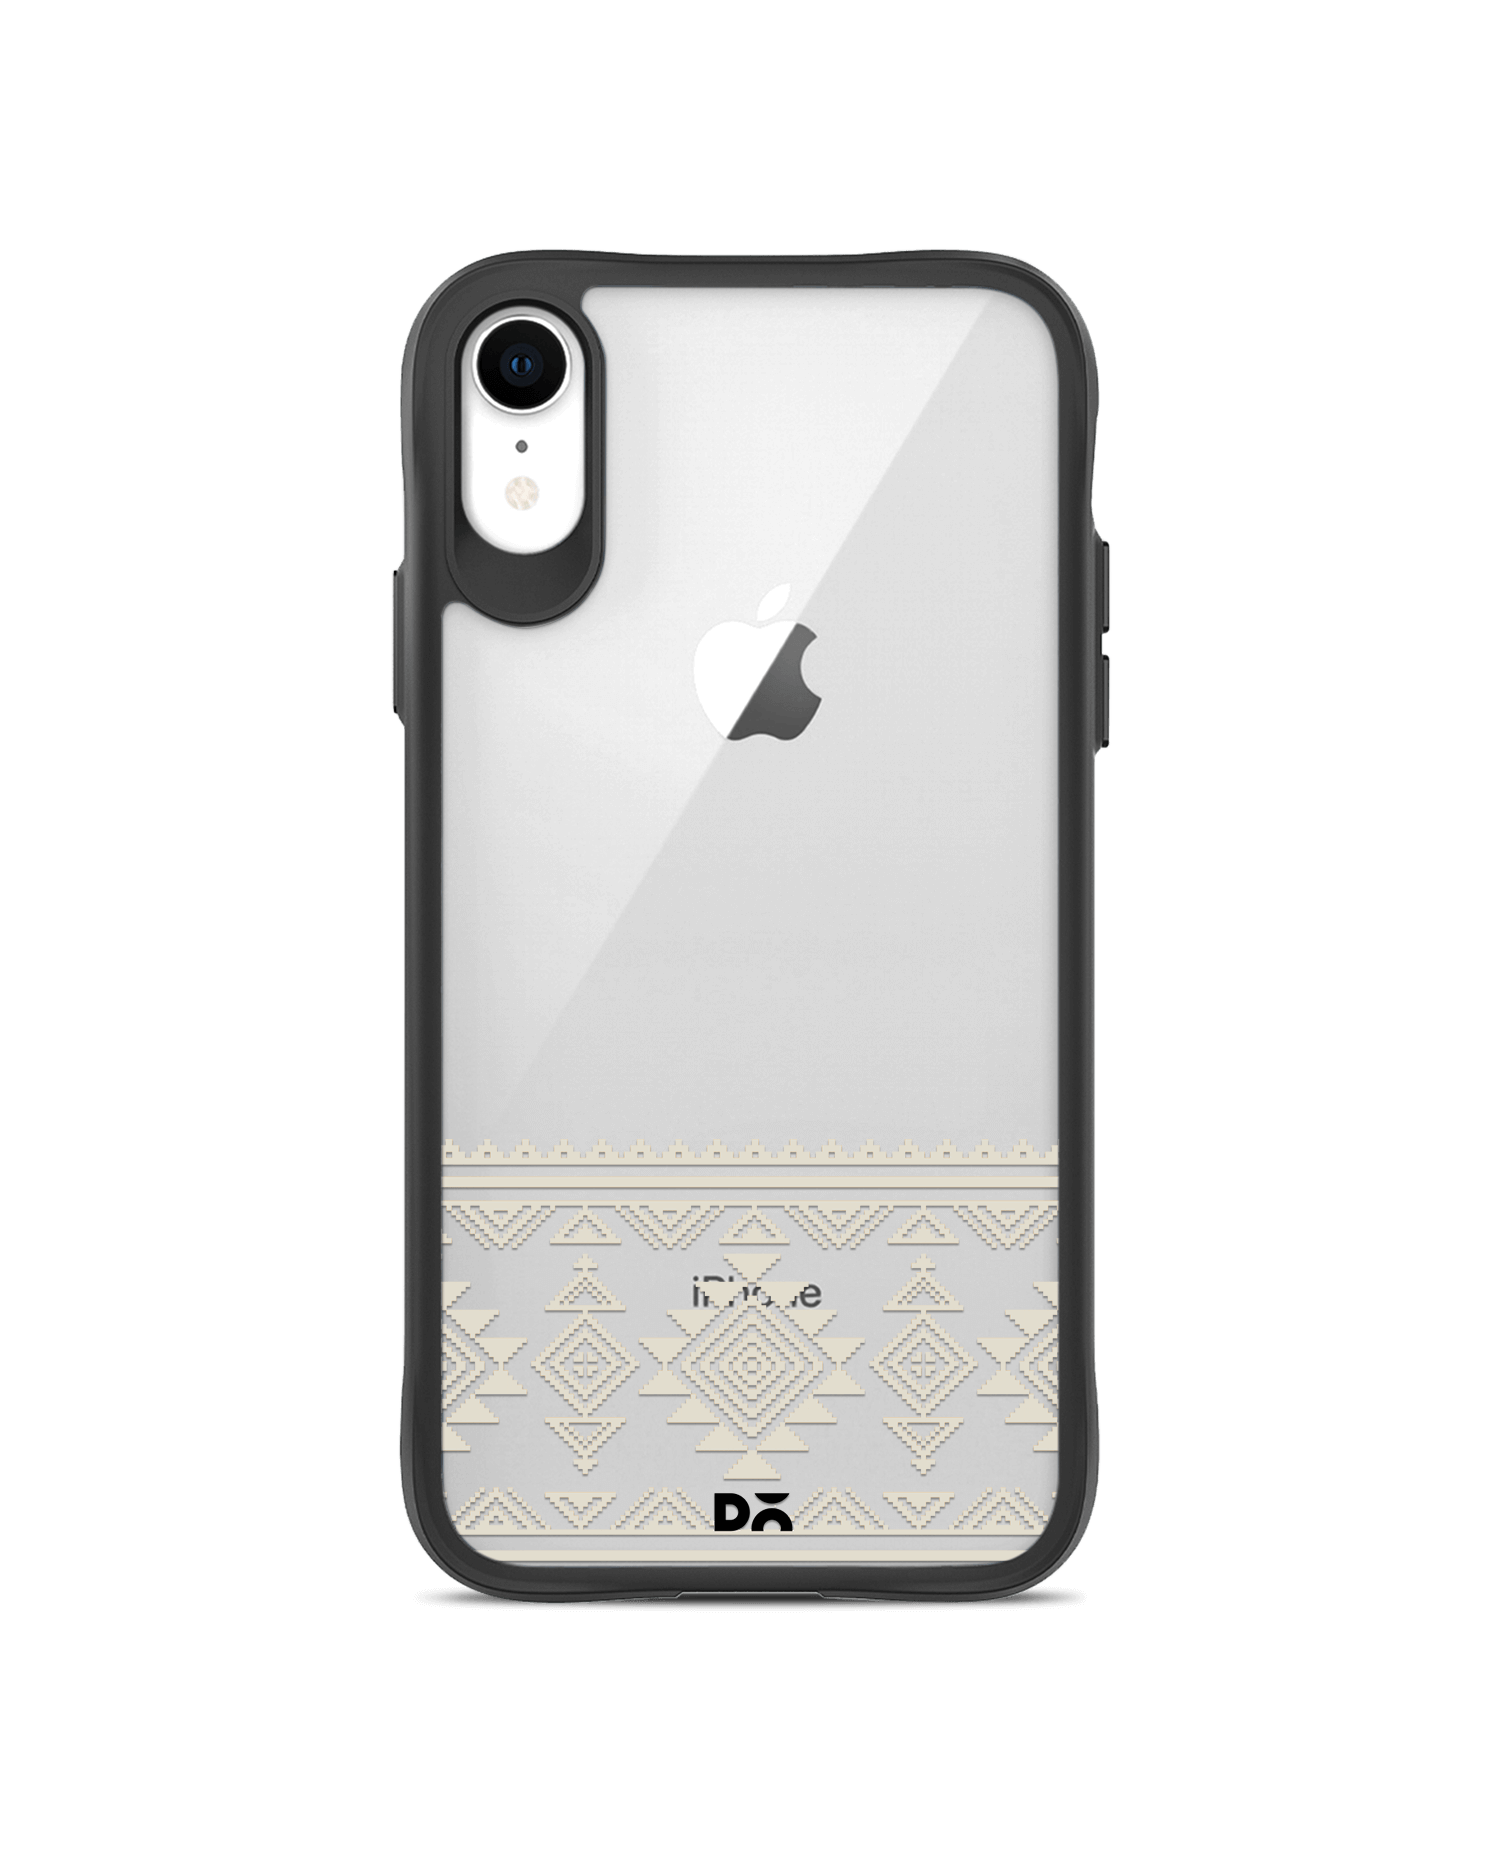 New Tattoo Phone Cases | Design By Humans